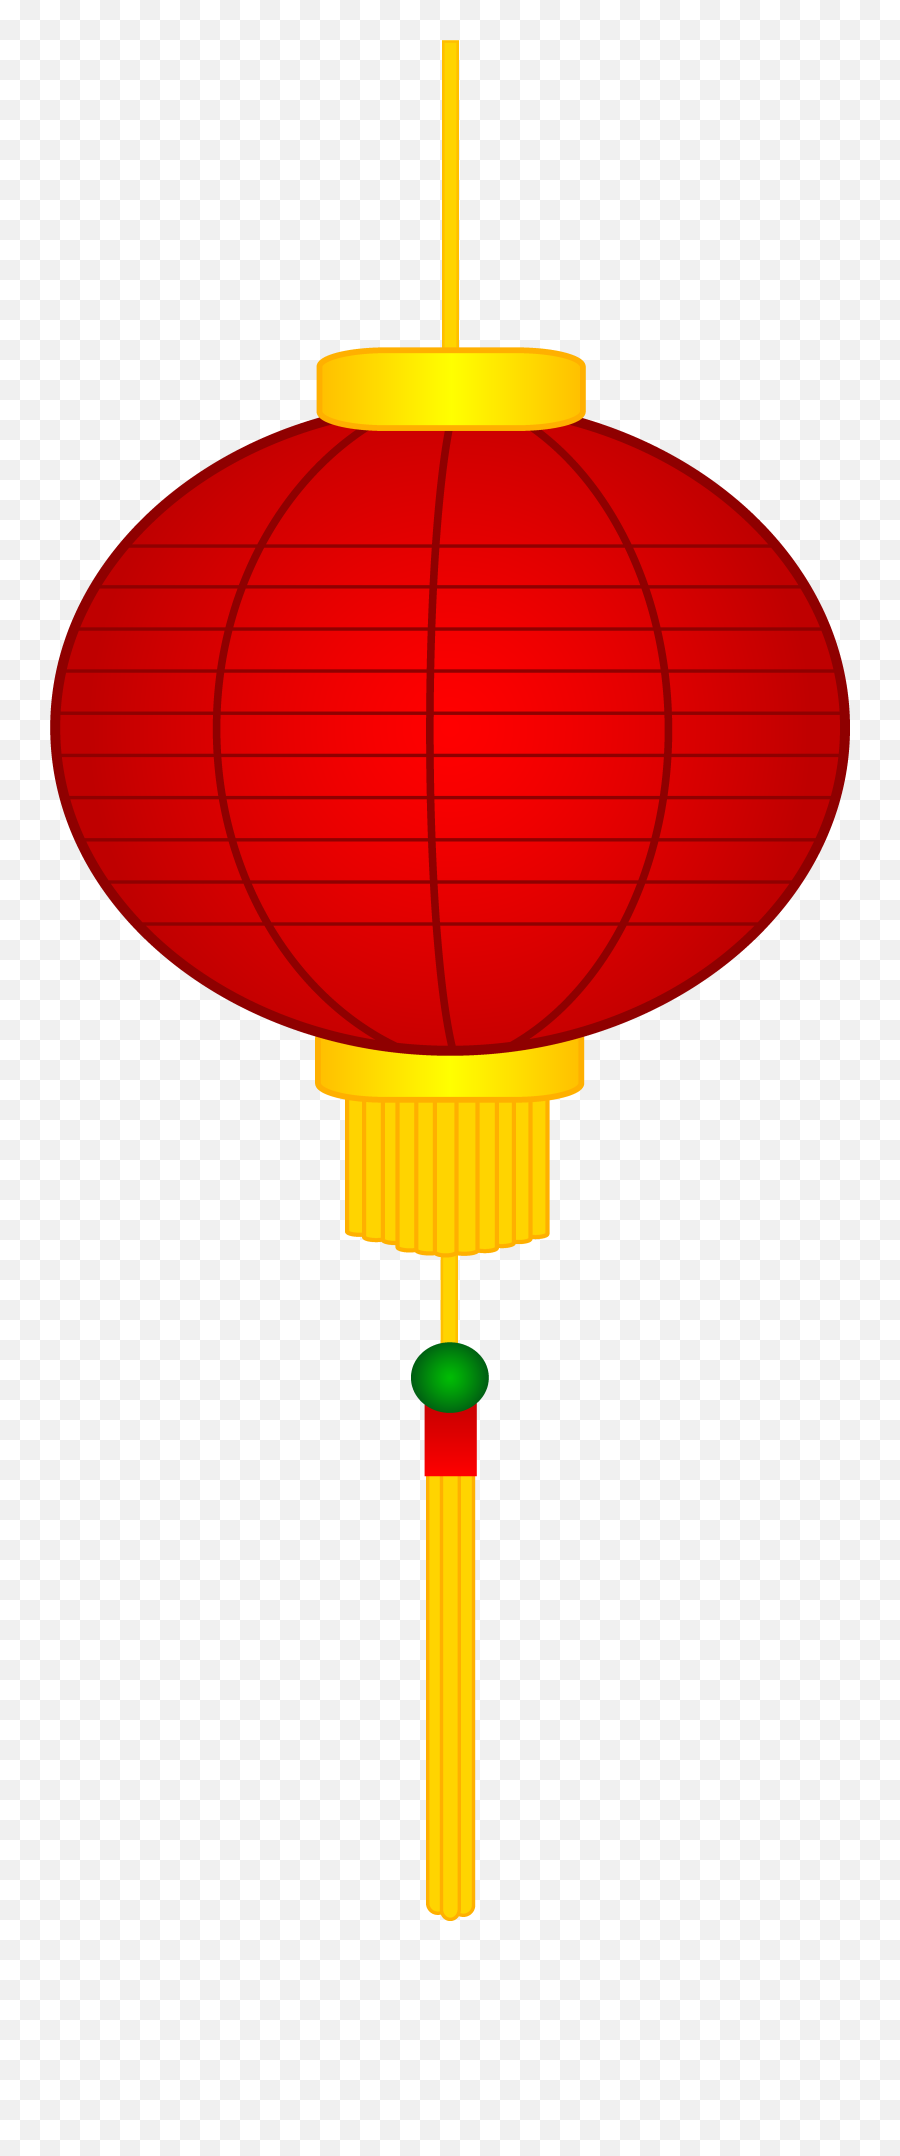 Japanese Clipart Red Lantern Japanese Red Lantern - Clipart Chinese Lantern Emoji,Lantern Emoticon